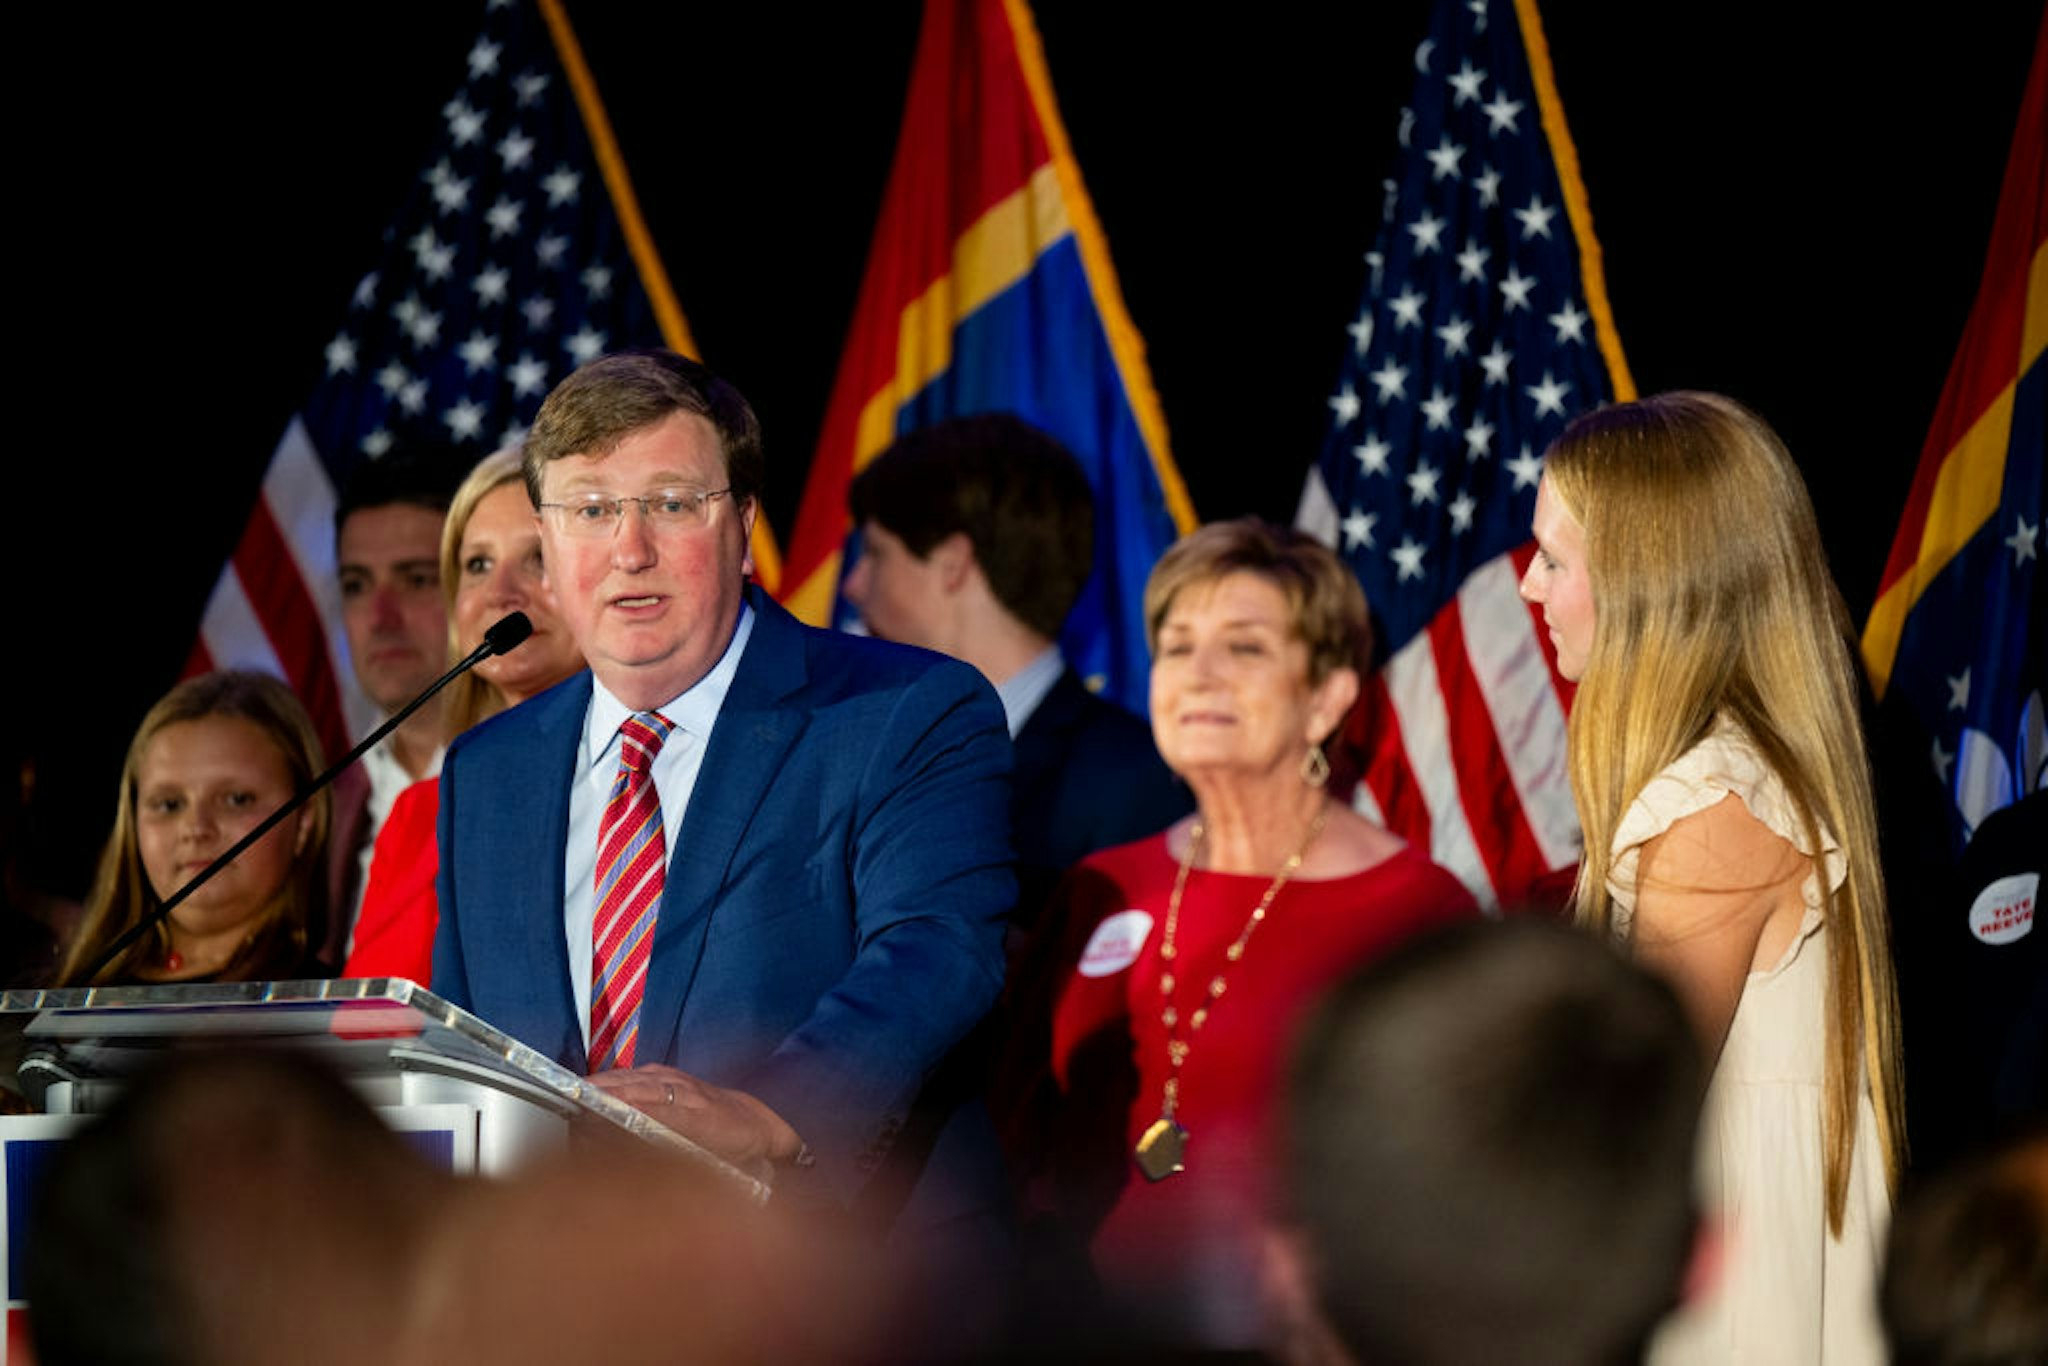 FLOWOOD, MISSISSIPPI - NOVEMBER 07: Mississippi incumbent Republican Gov. Tate Reeves and his family speak to supporters during an election night watch party at The Refuge Hotel &amp; Conference Center on November 07, 2023 in Flowood, Mississippi. Gov. Reeves won reelection against Democratic challenger Brandon Presley, a second cousin of Elvis Presley.